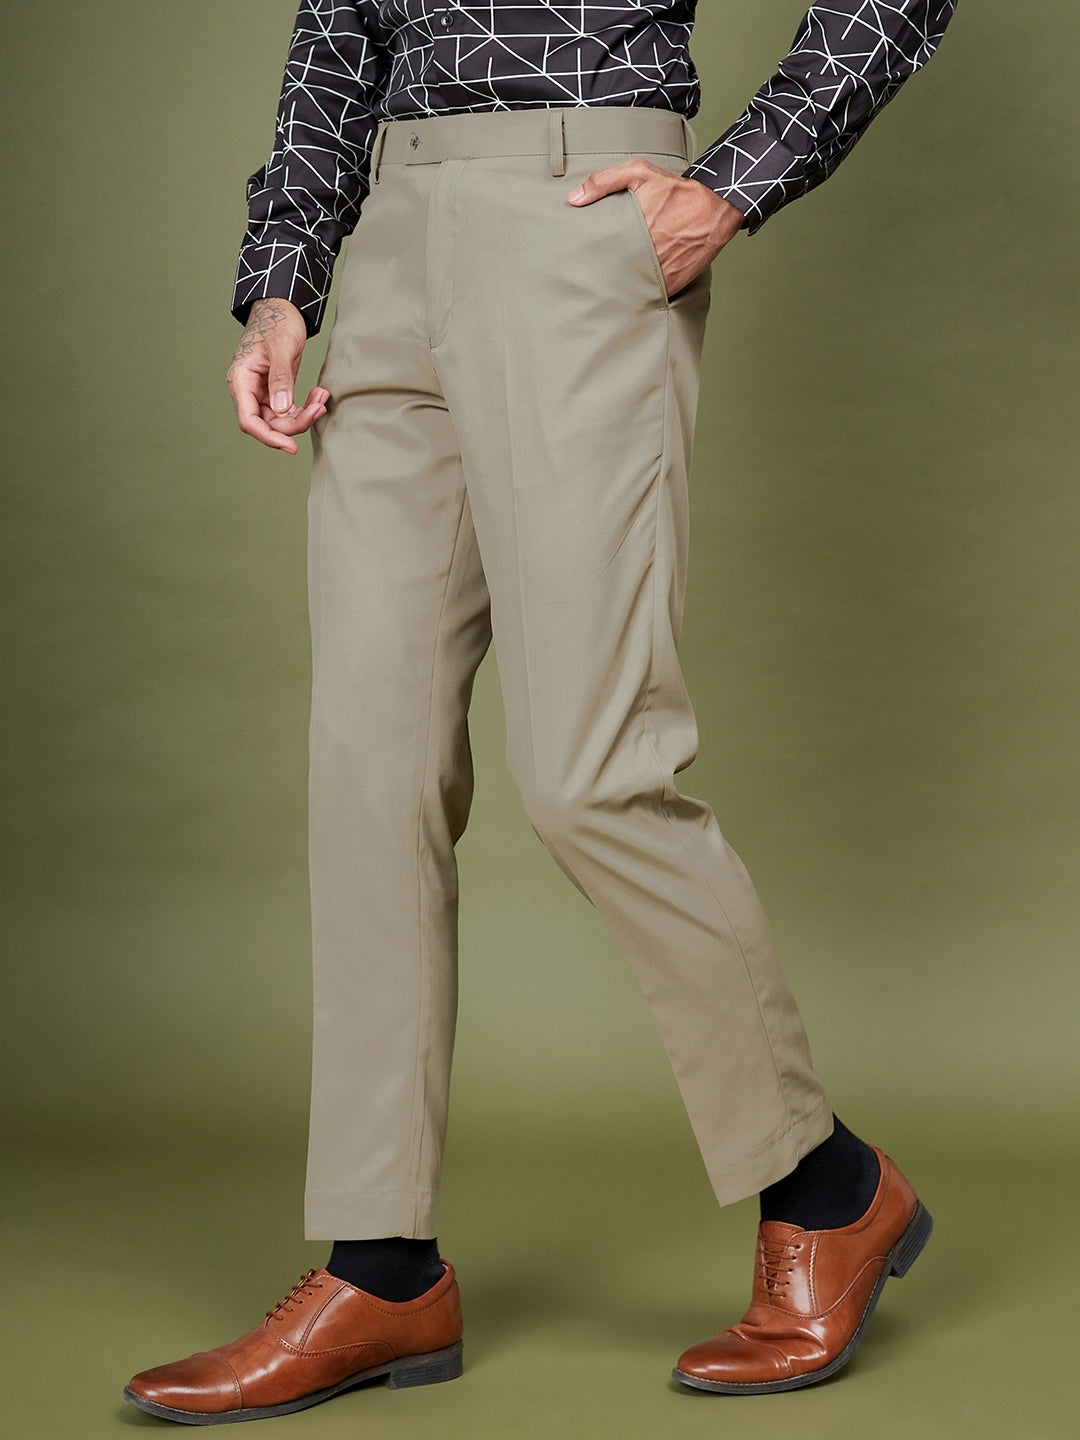 Men Formal Trousers - Buy Men Trousers Online in India - Clai World